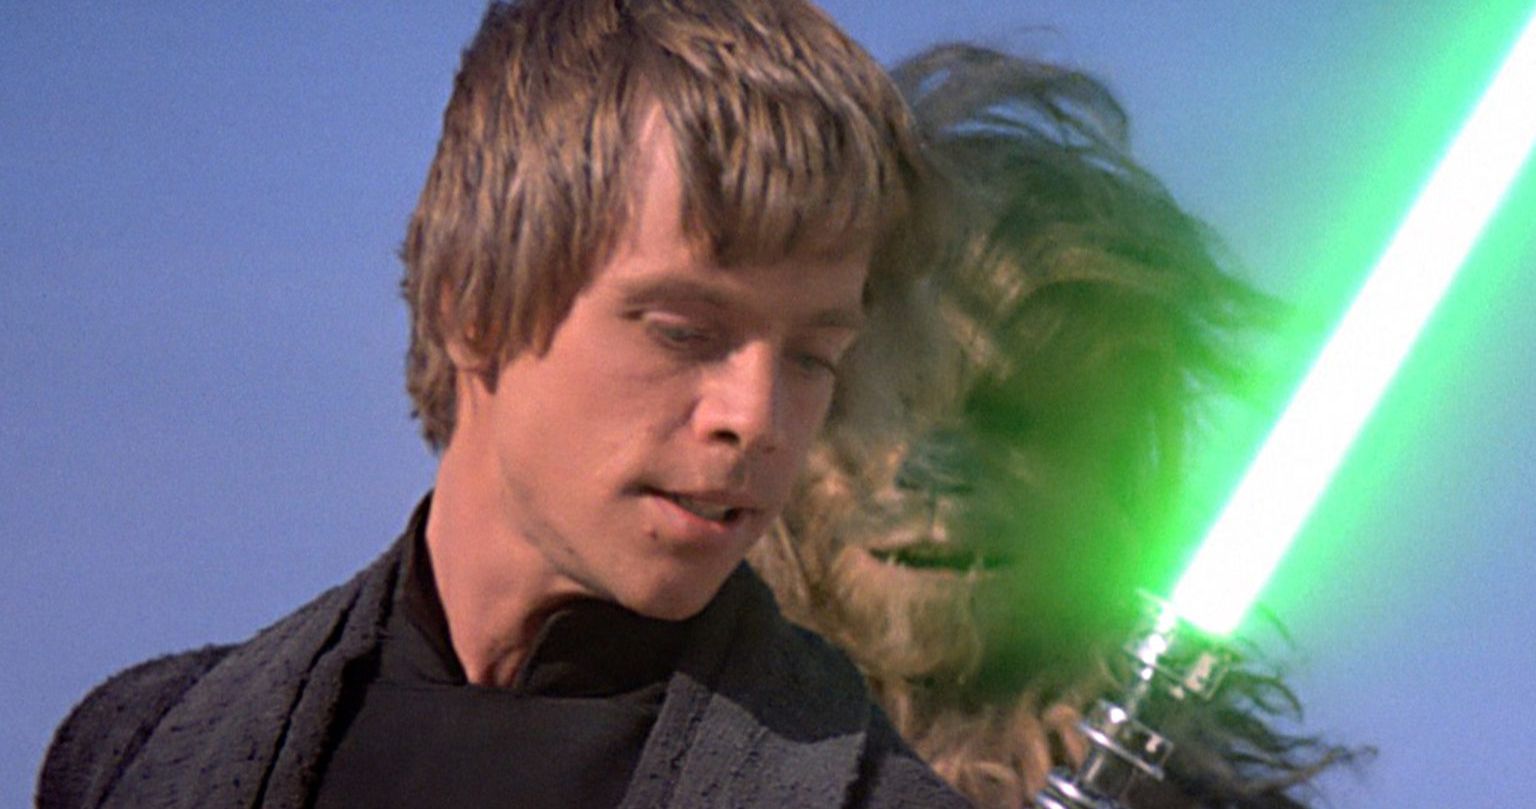 Marvel's What If...? Series Was Denied a Luke Skywalker Cameo